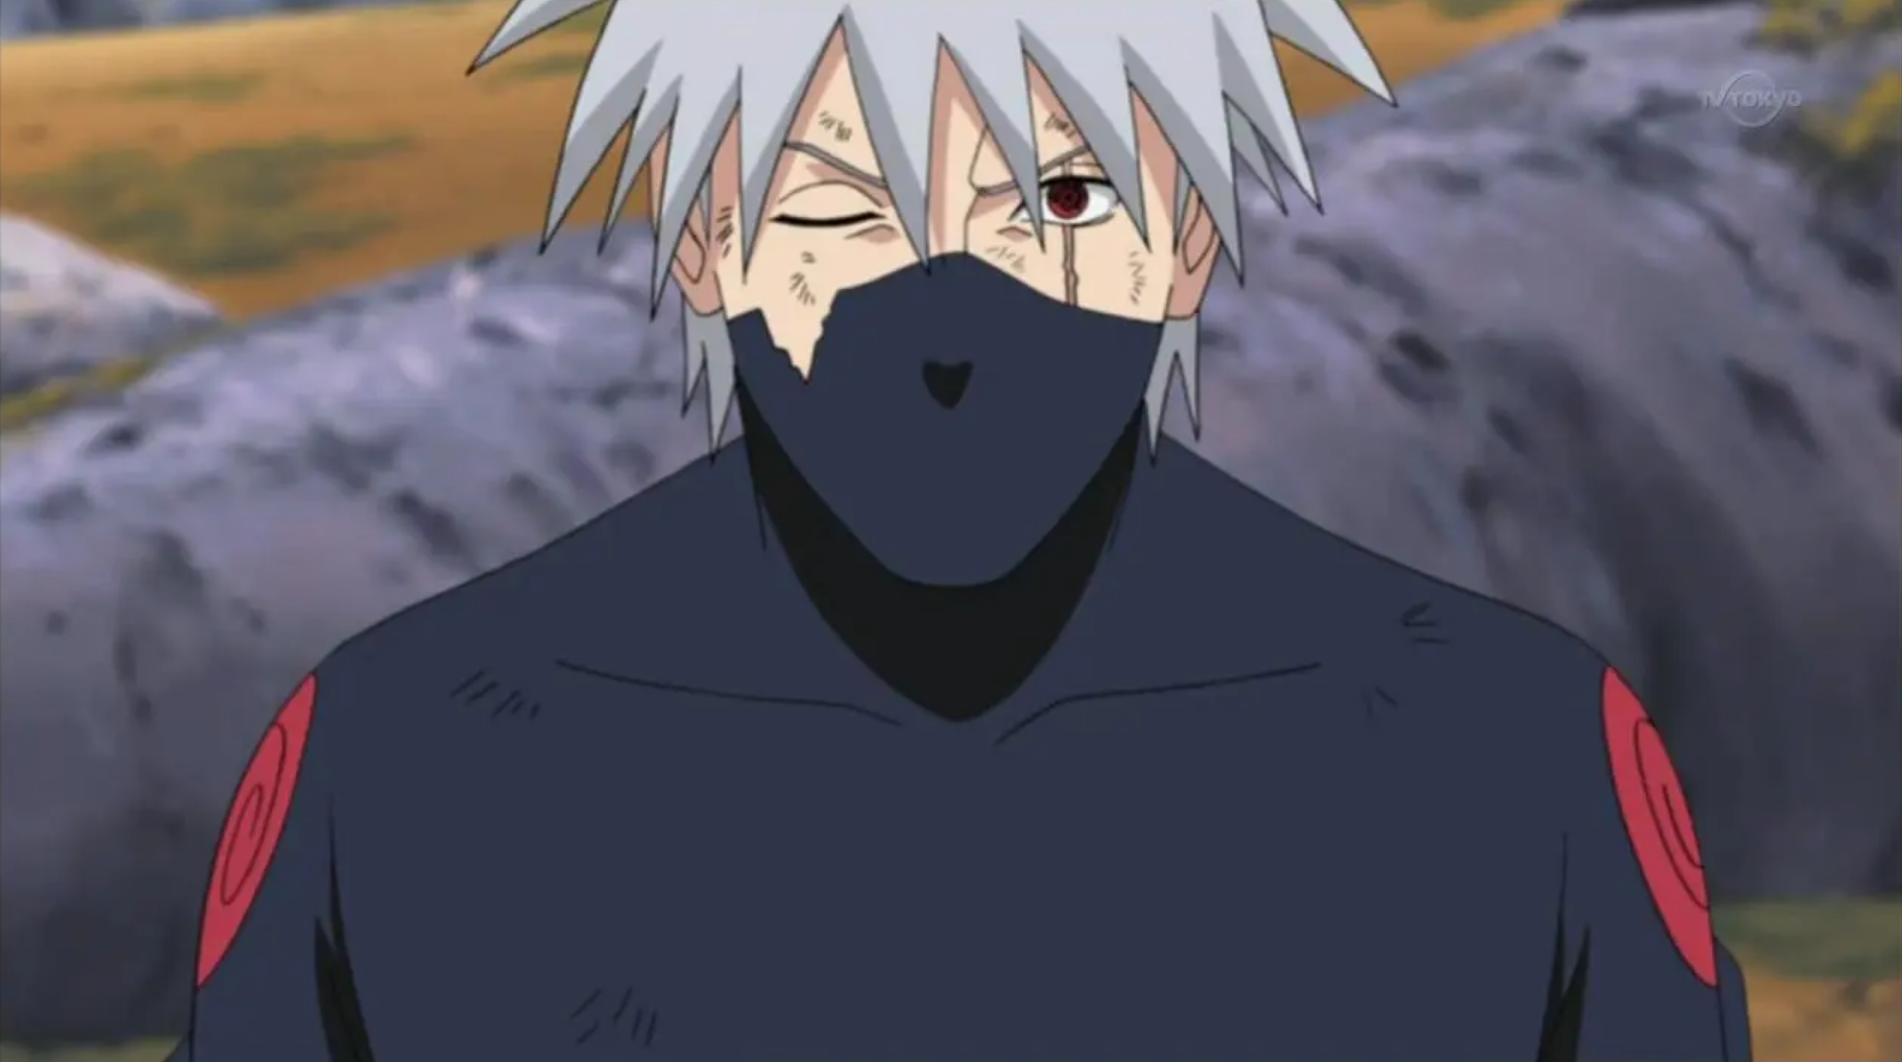 Why Does Kakashi Wear a Mask in the 'Naruto'